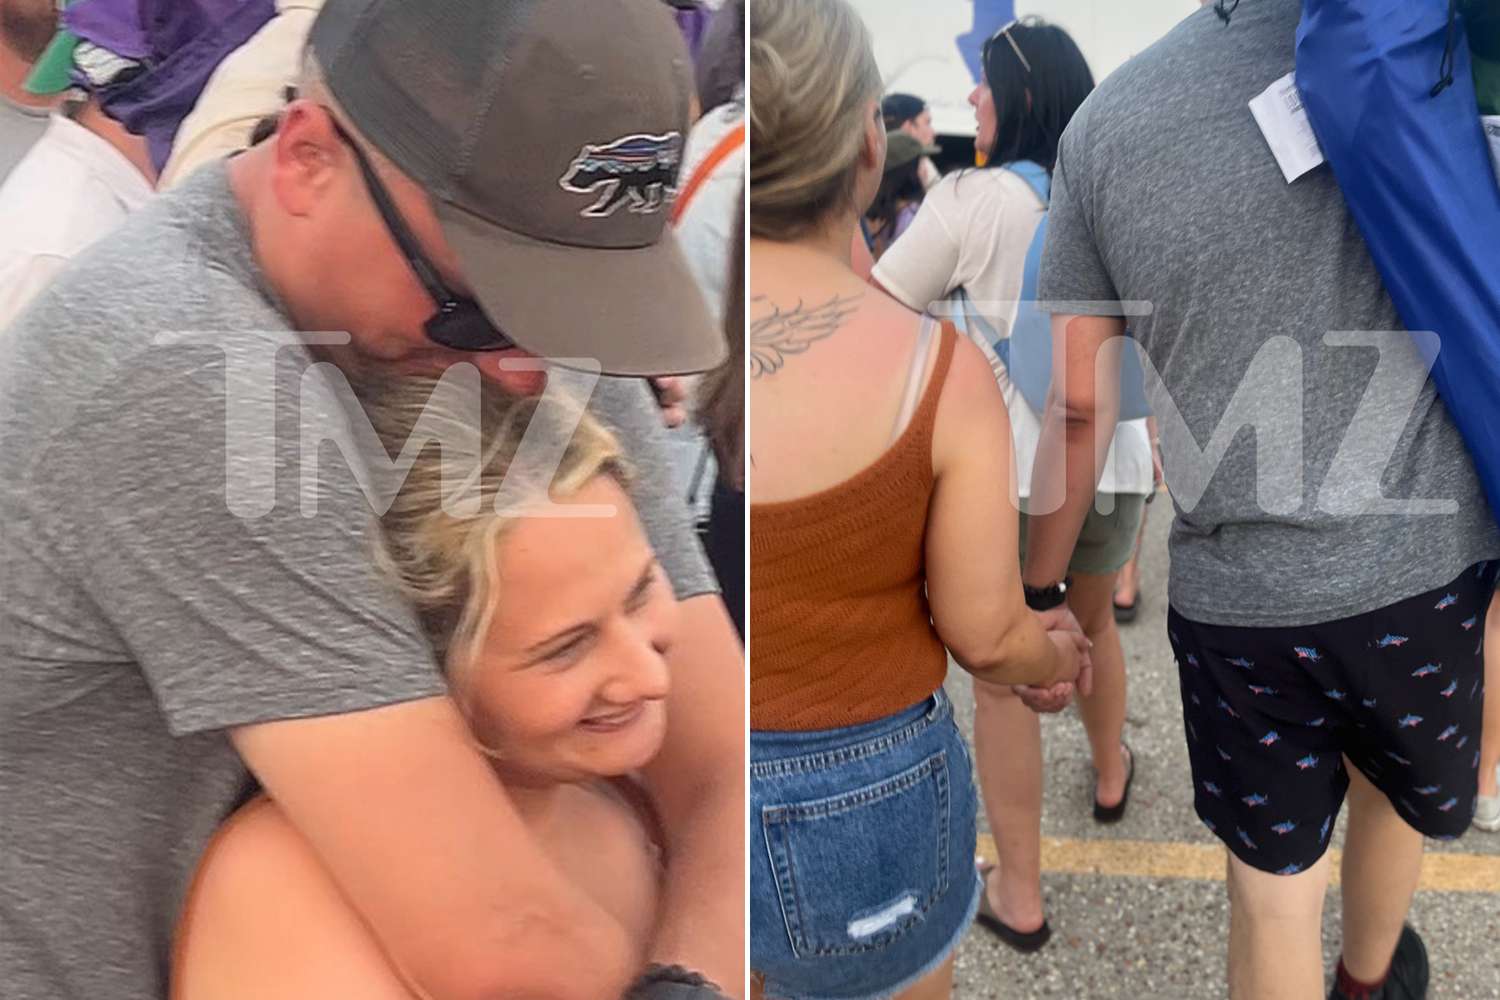 New Photos Show Gypsy Rose Blanchard Cuddling and Holding Hands with Ex-Fiancé